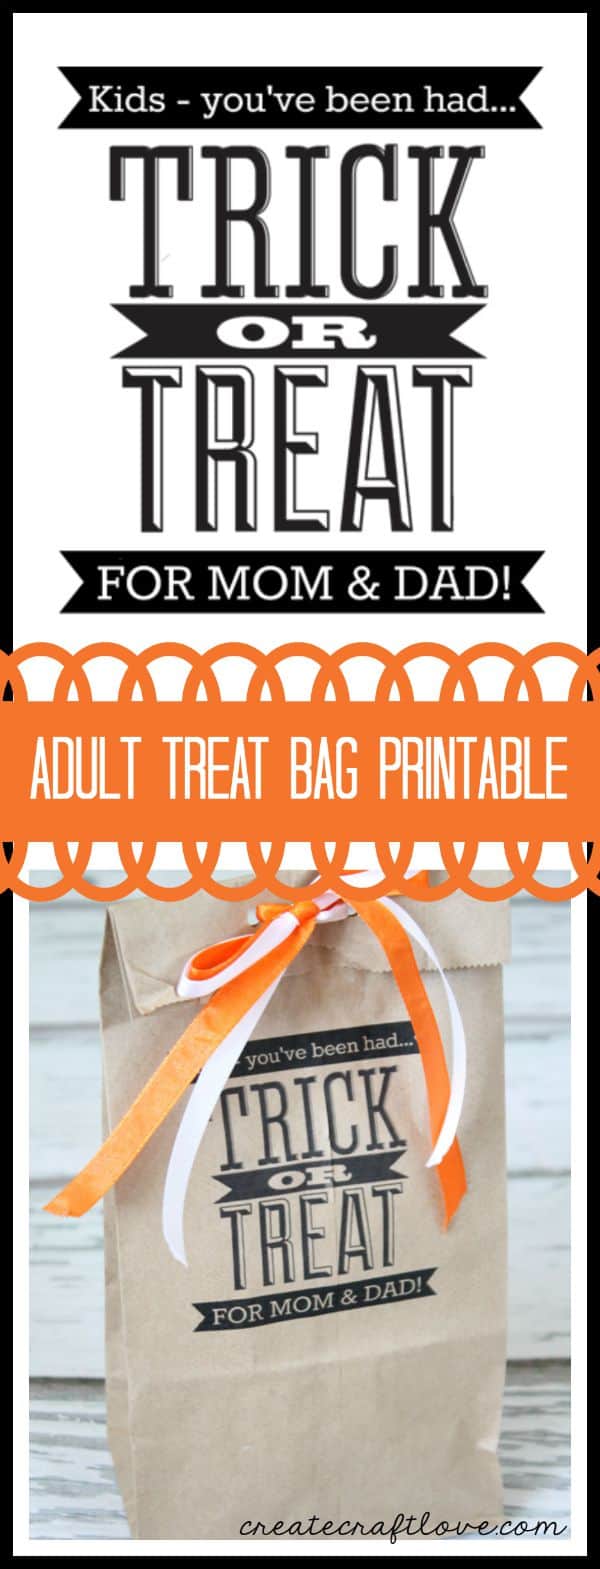 Why should the kids have all the fun? Grab this free Adult Treat Bag Printable to surprise the parents on Halloween! via createcraftlove.com